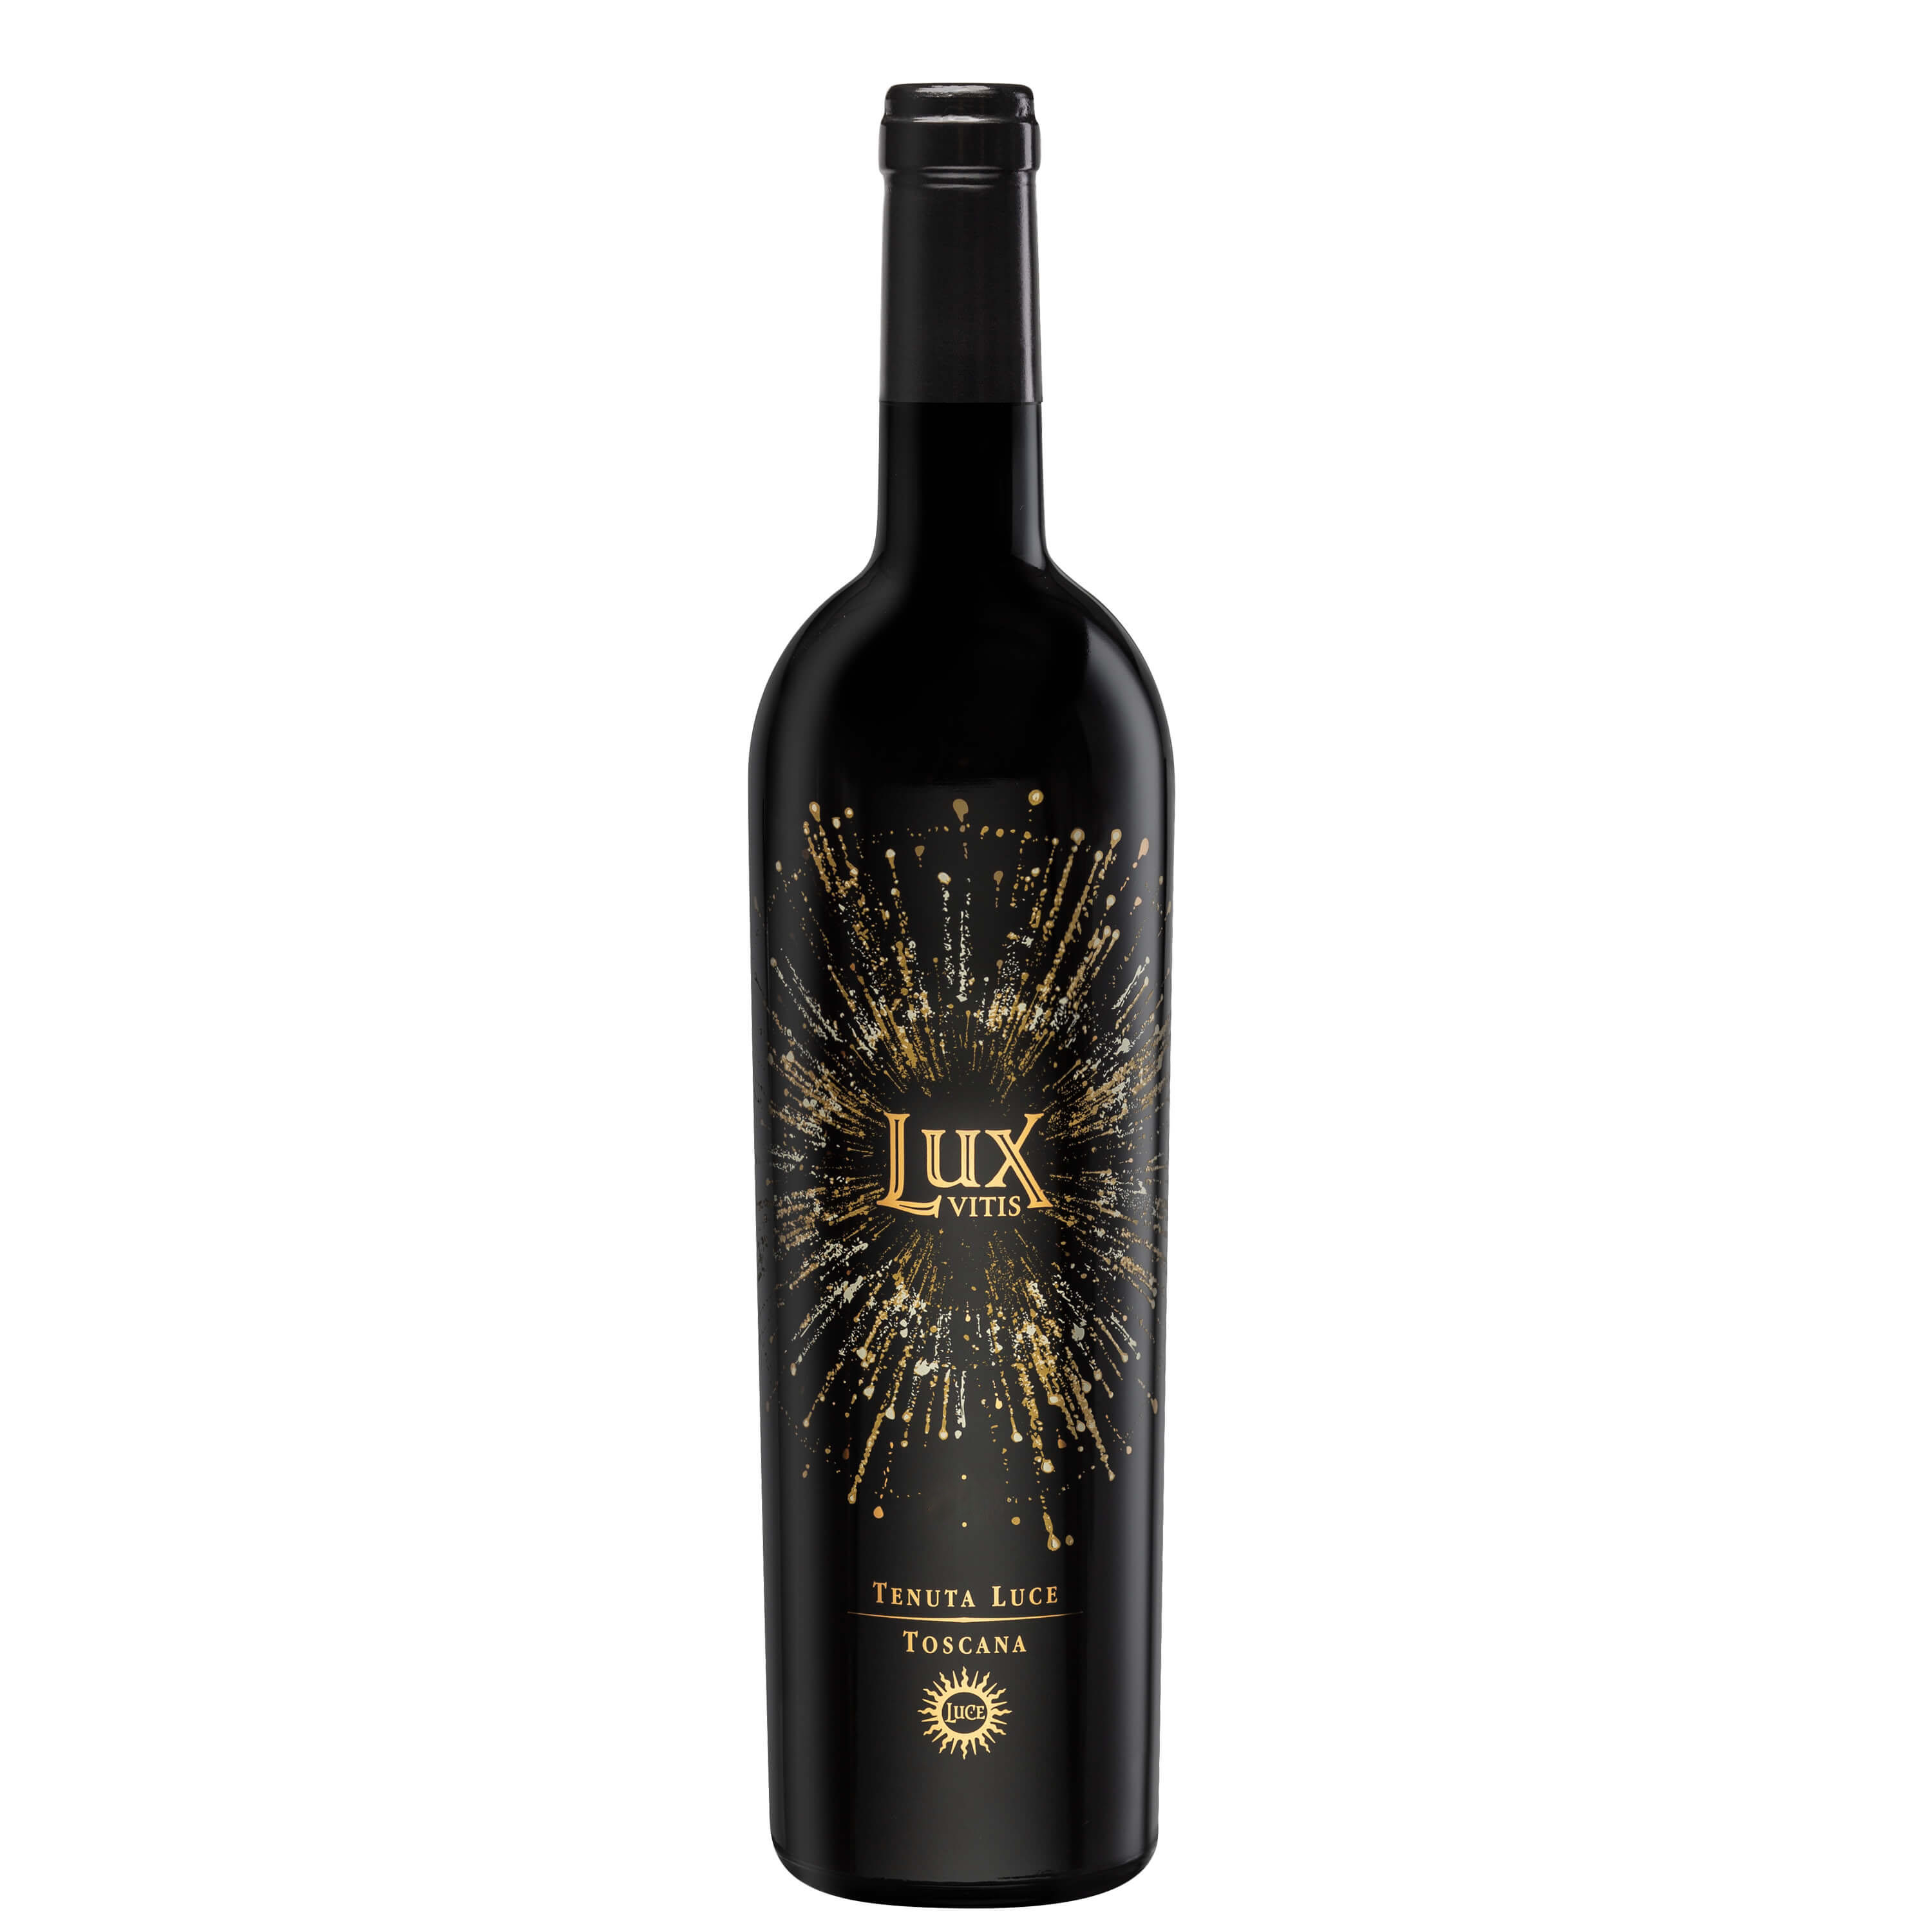 Toscana Rosso Igt Lux Vitis 2020 125559 IT Tannico